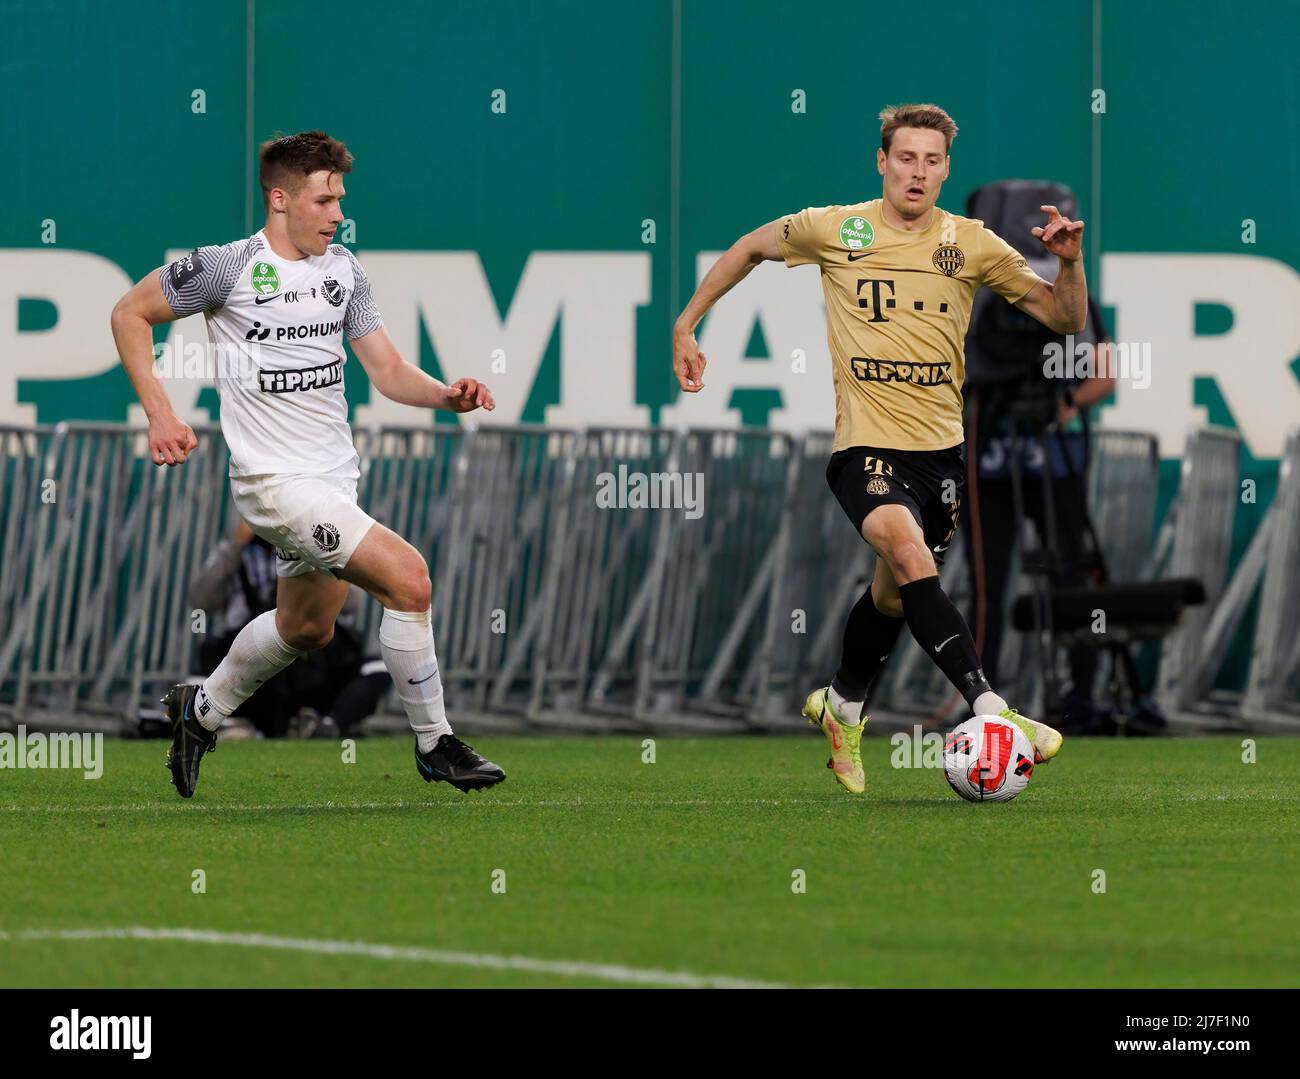 Hungary - Ferencvárosi TC - Results, fixtures, squad, statistics, photos,  videos and news - Soccerway